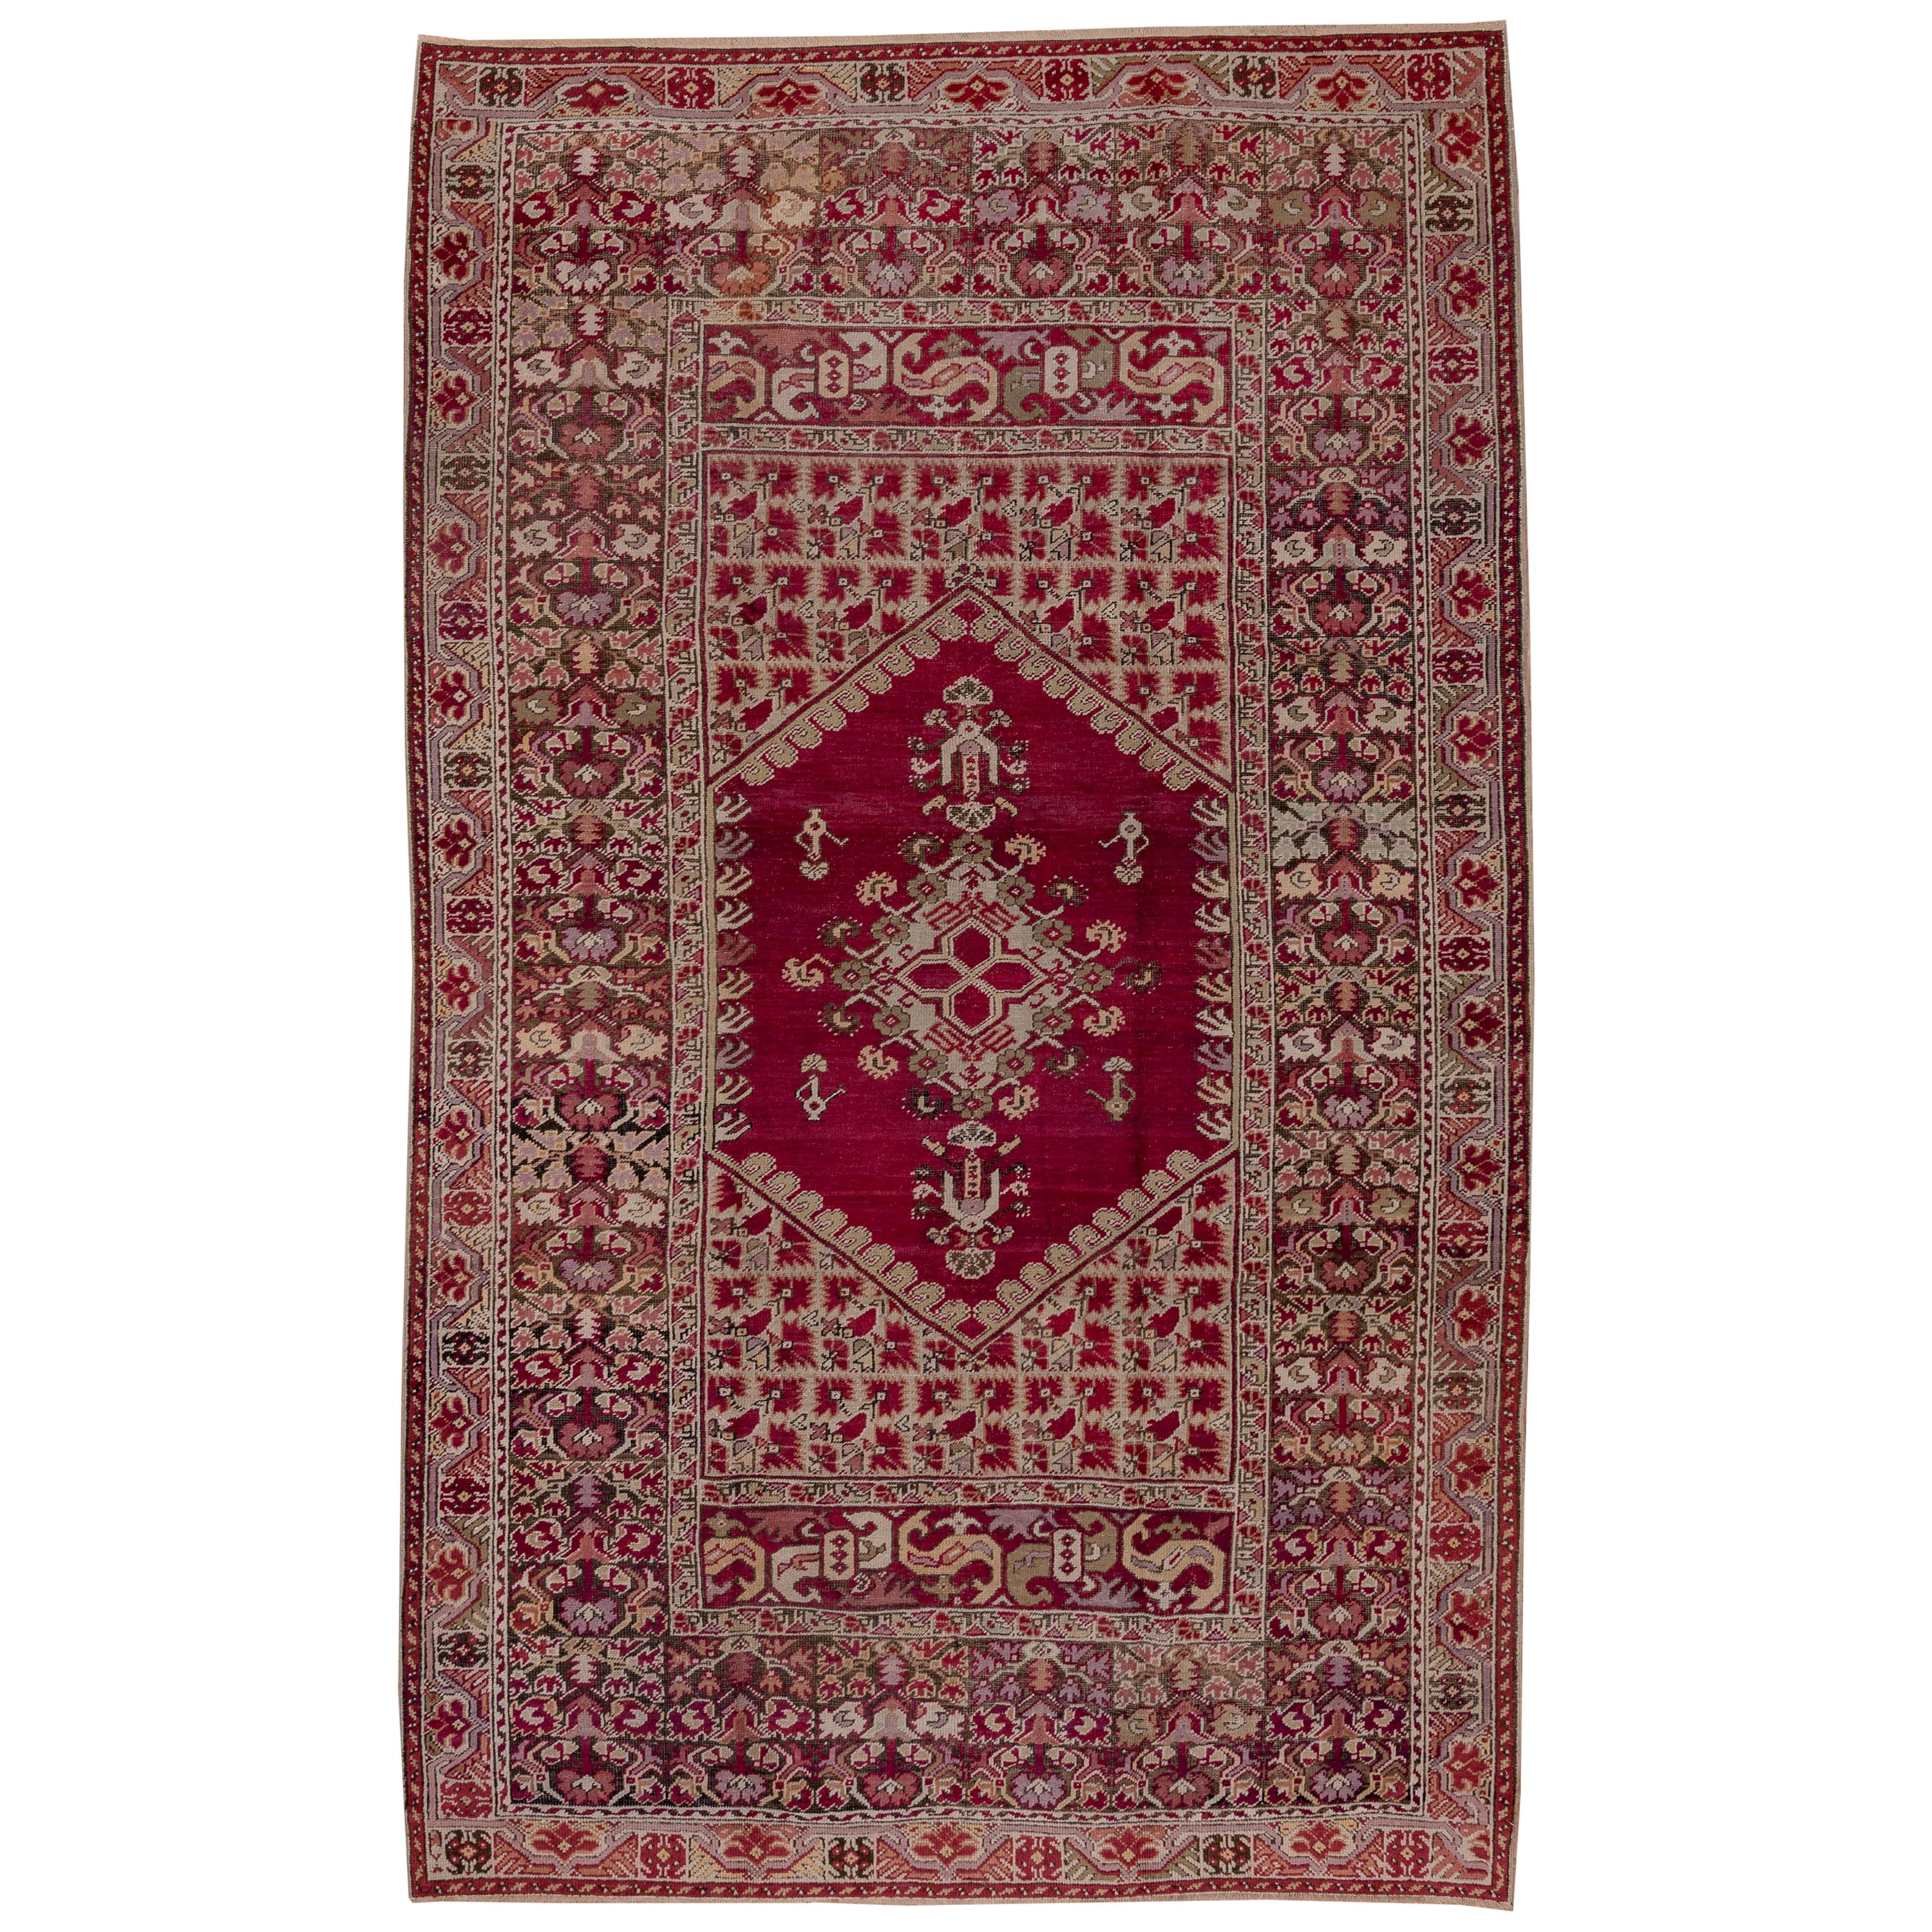 Finely Woven Antique Turkish Ghiordes Rug, Ruby Red Field, circa 1900s